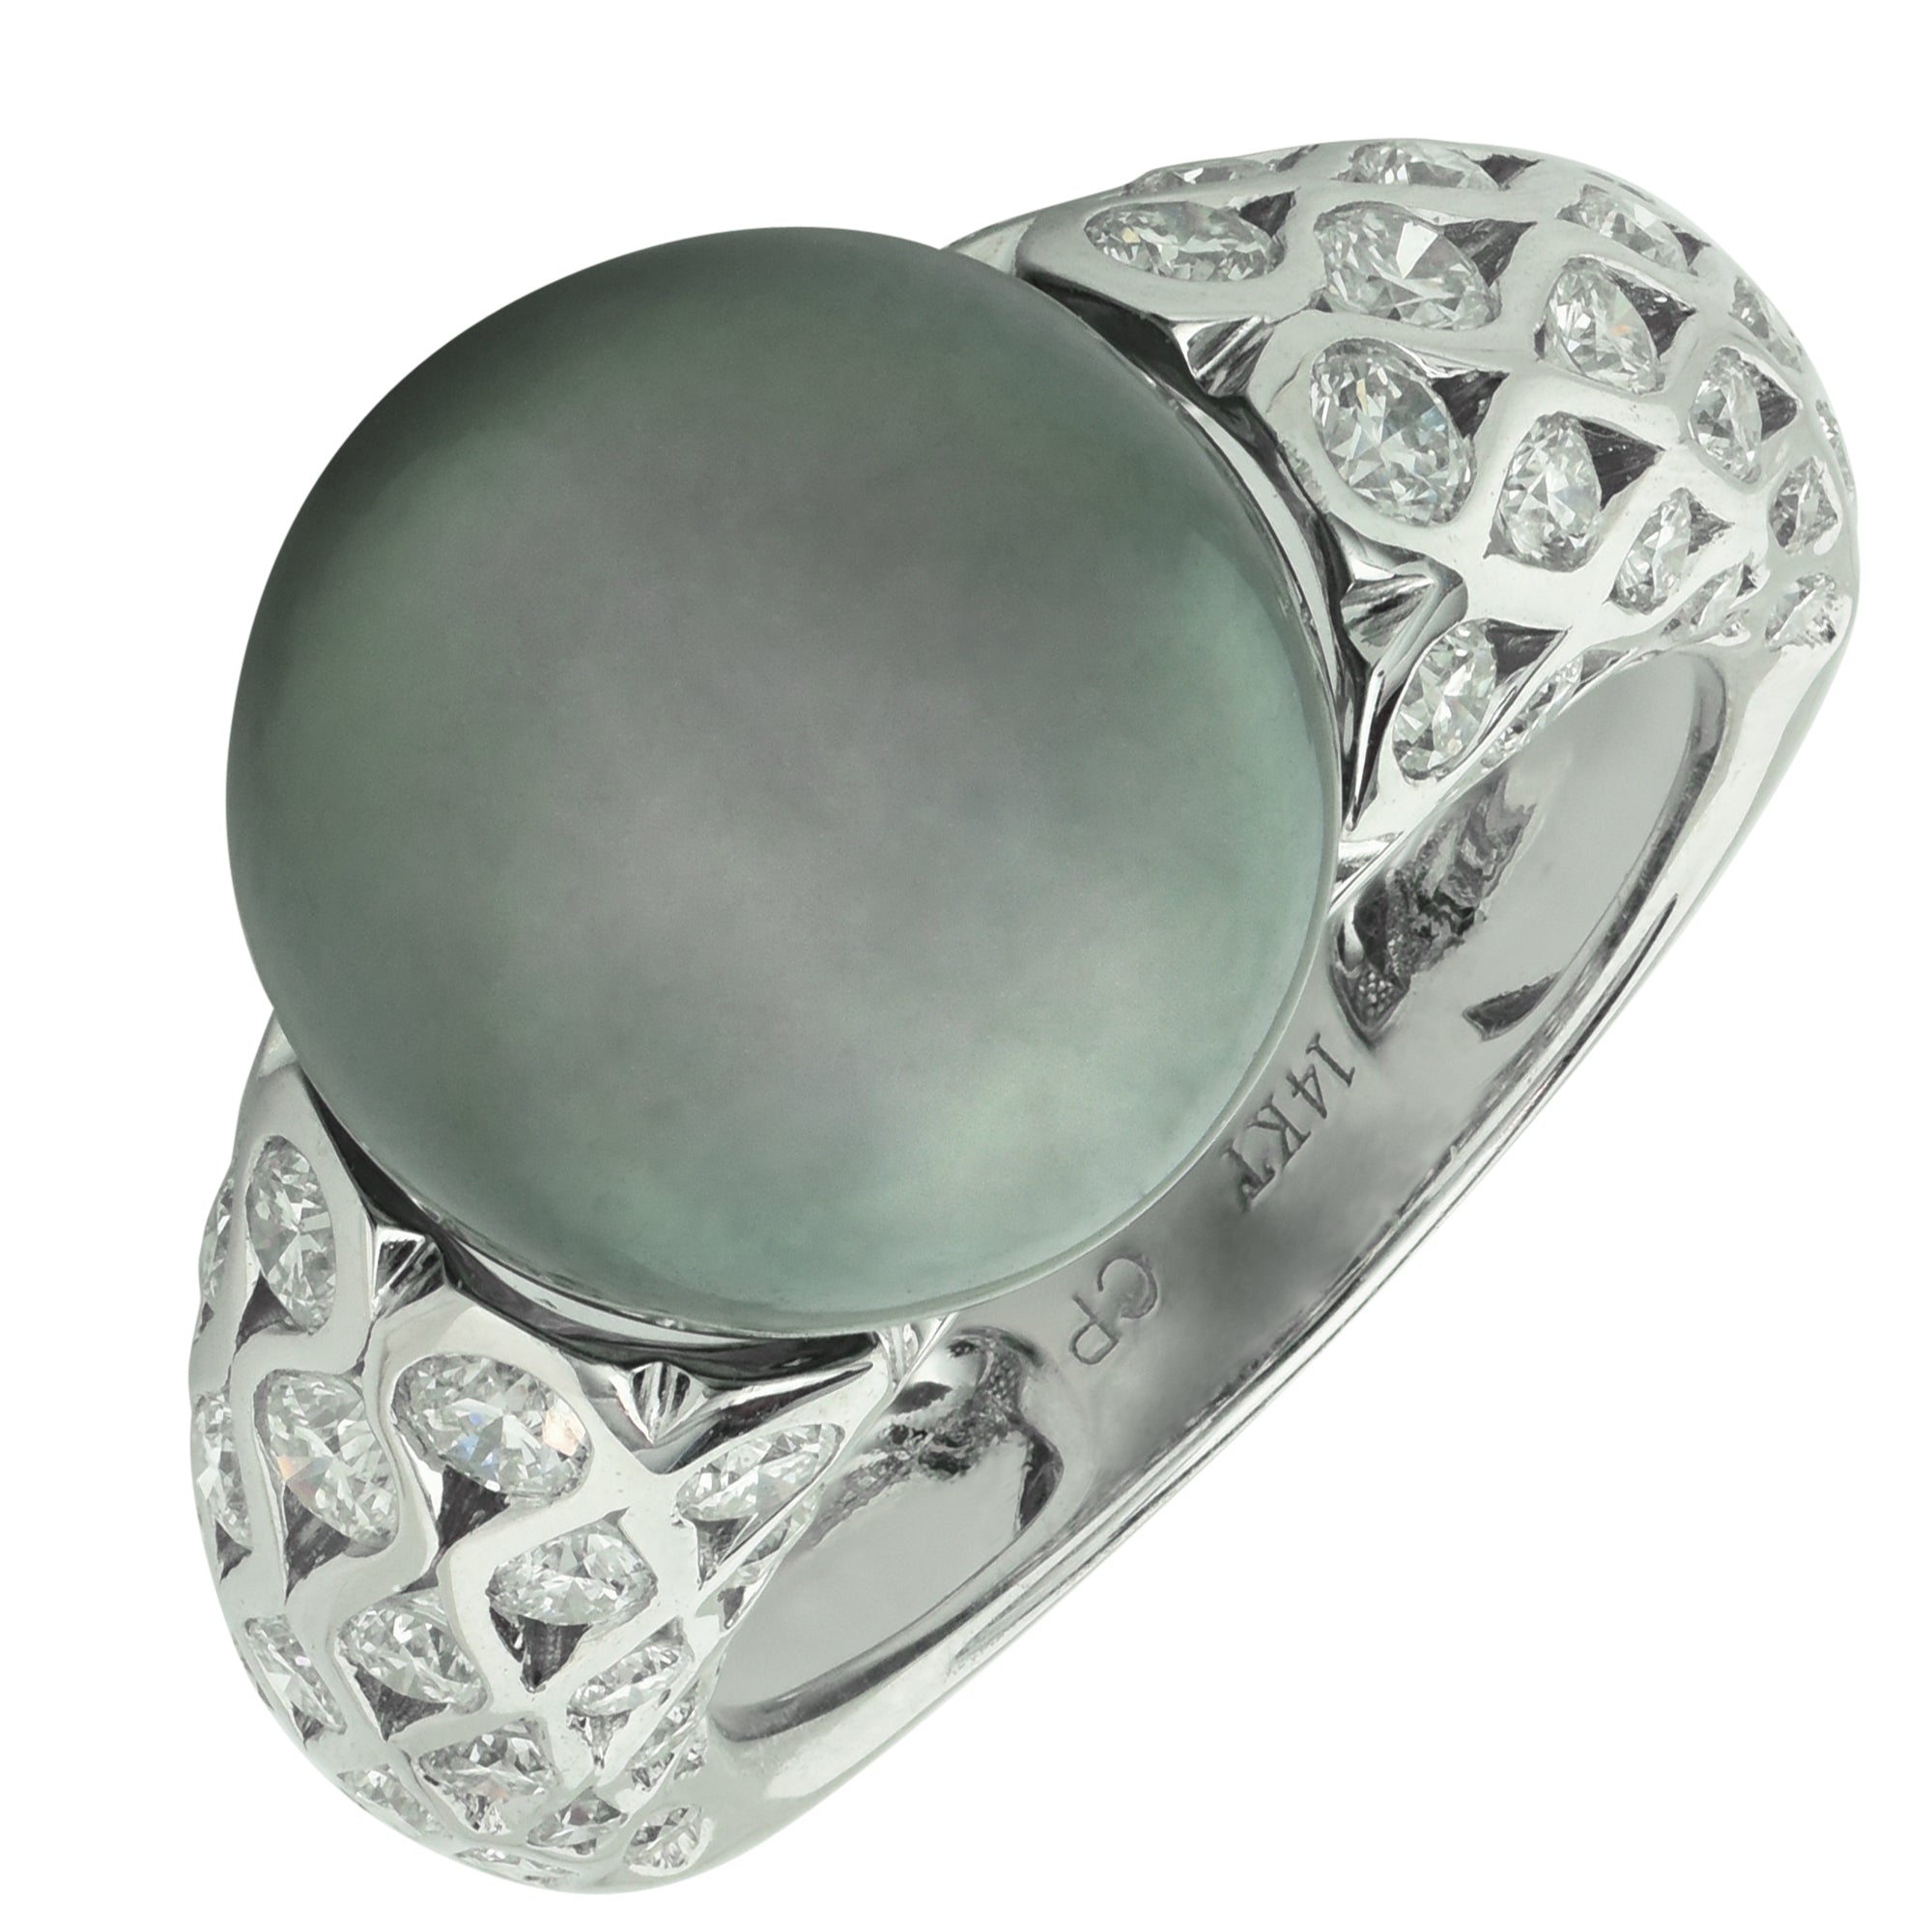 Black Tahitian Pearl Ring in 14kt White Gold with Diamonds (1 5/8ct tw) (12-13mm pearl)